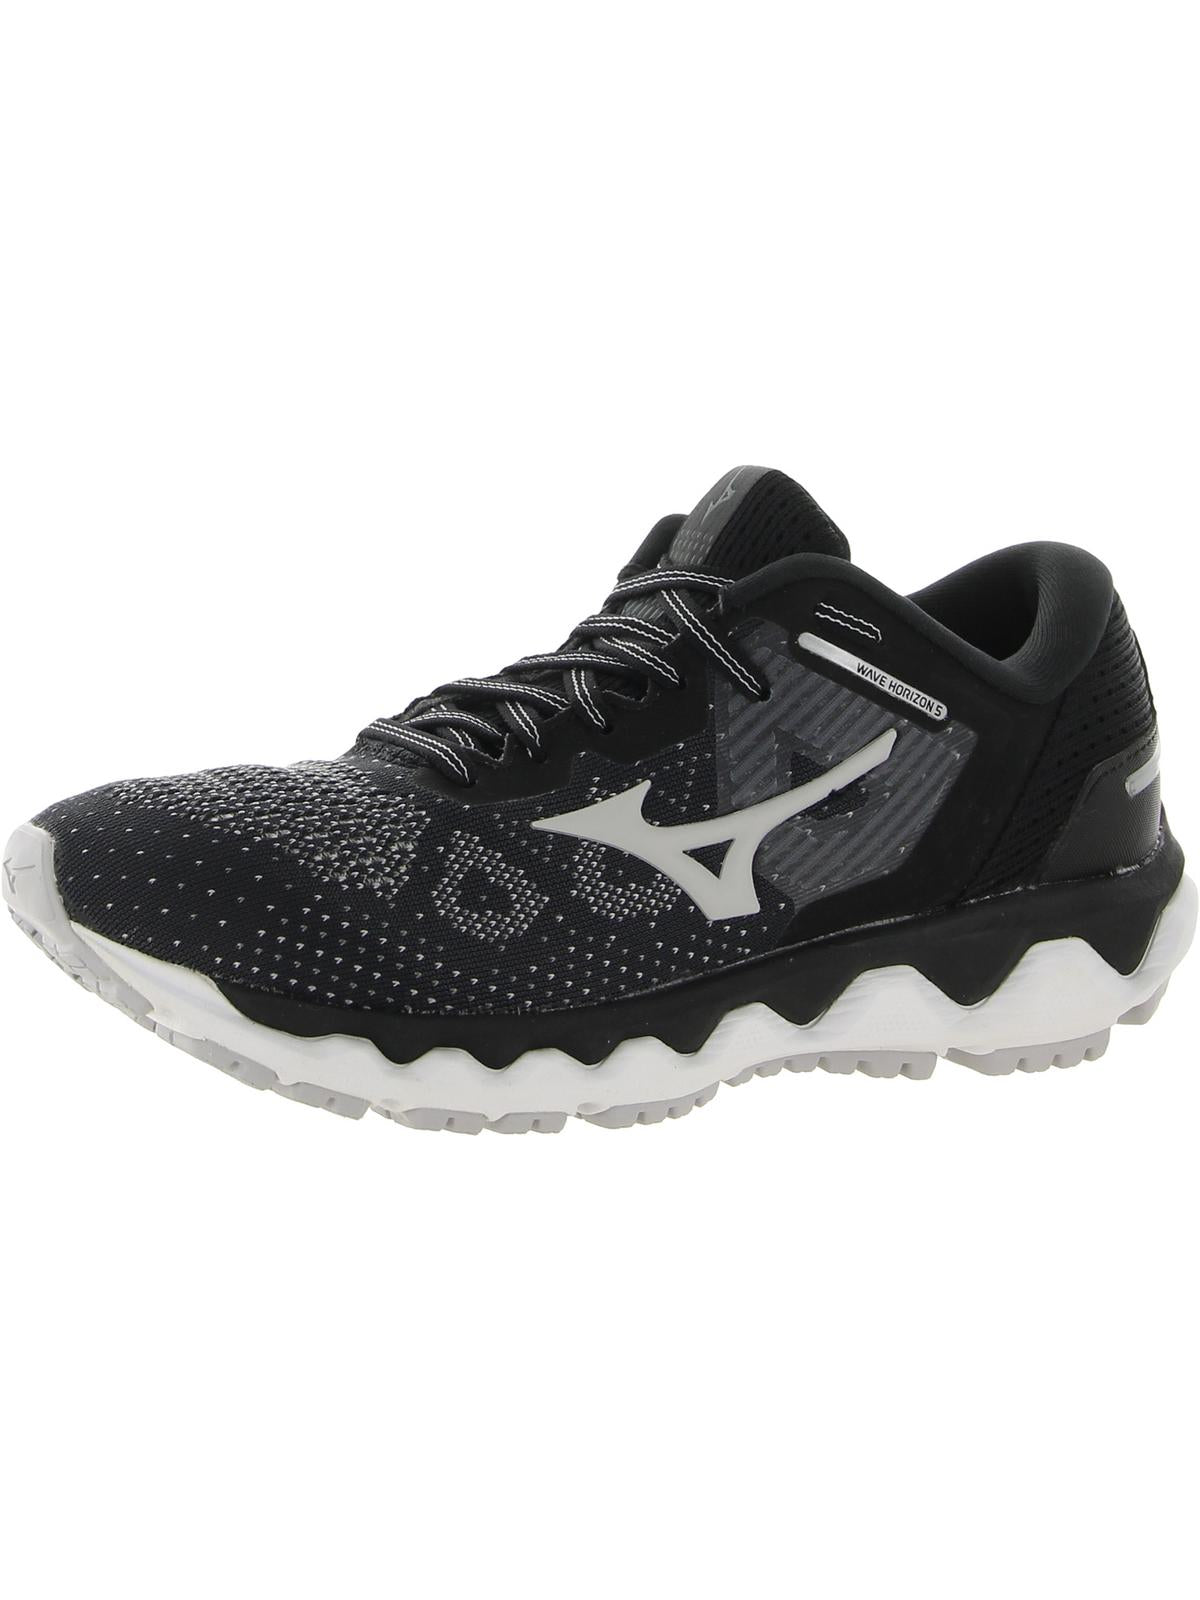 Mizuno Womens Gym Fitness Athletic and Training Shoes US 7 female